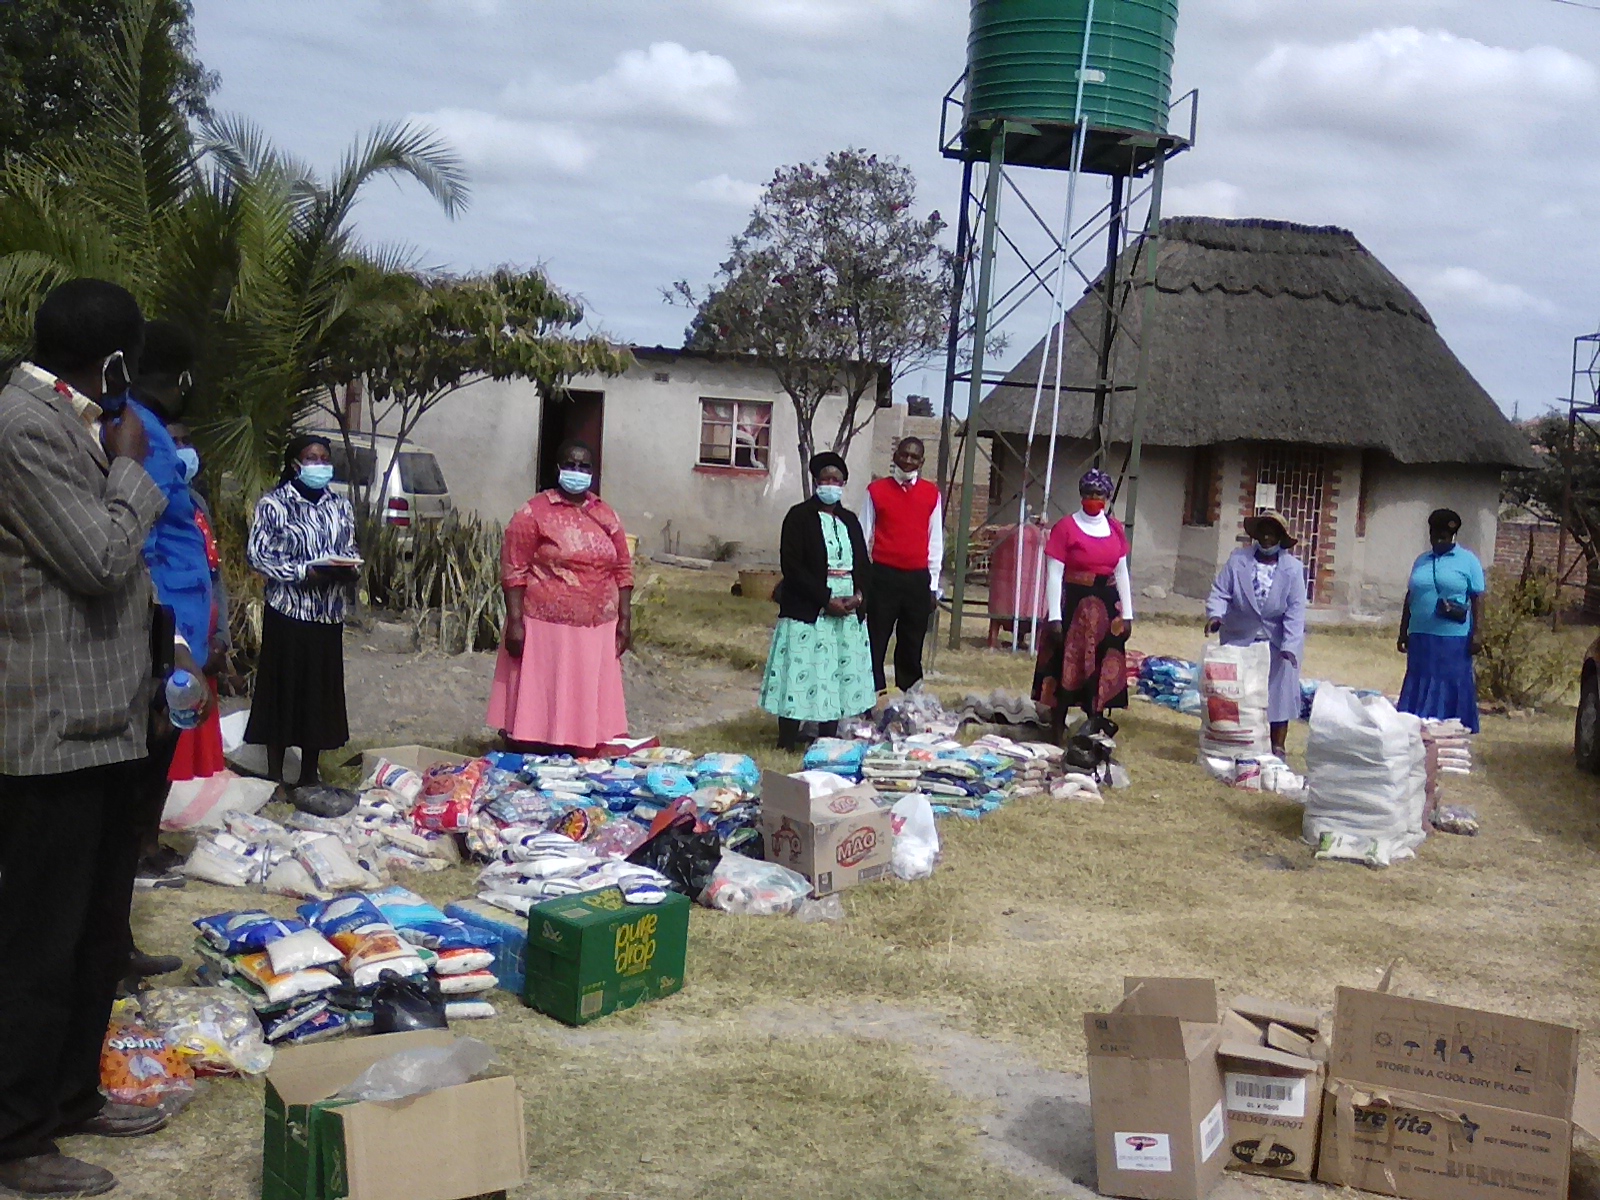 Fully masked, staff collect donations from a church in Harare